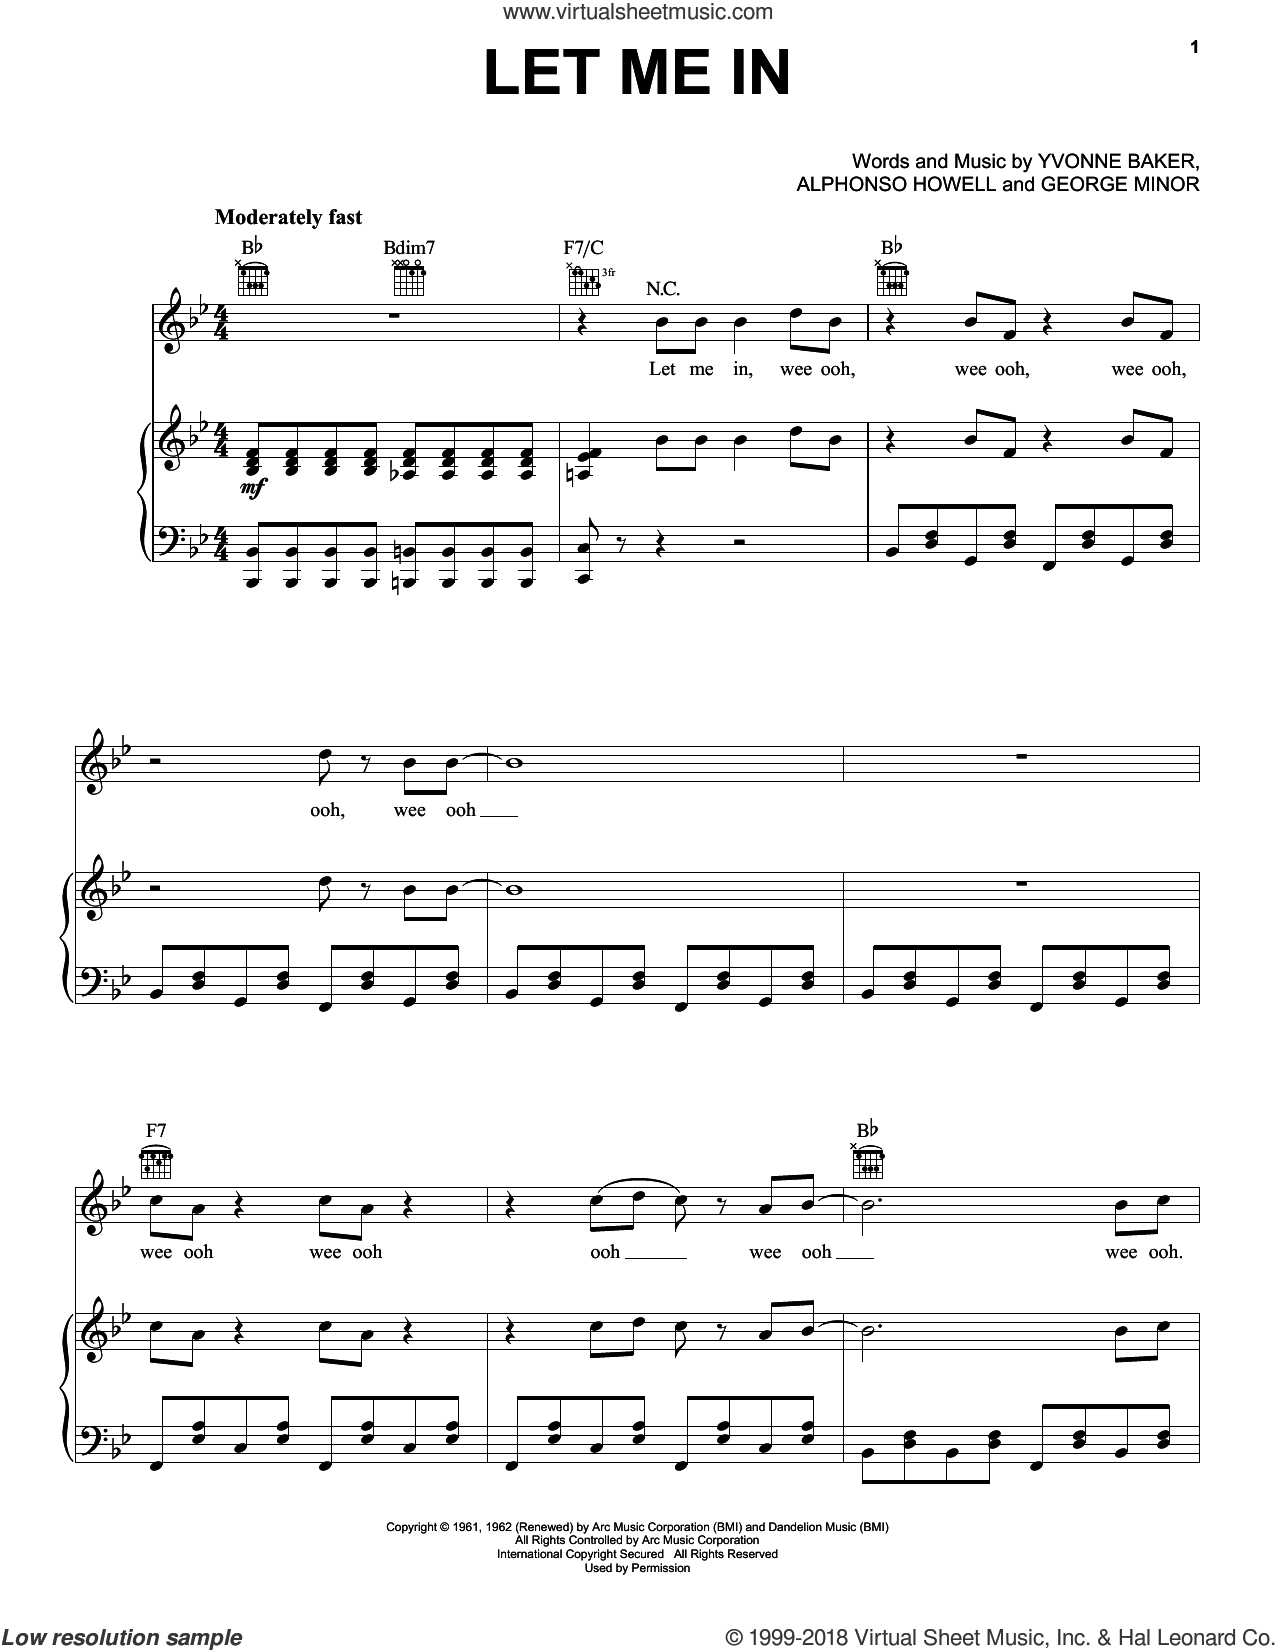 Sensations: Let Me In sheet music for voice, piano or guitar